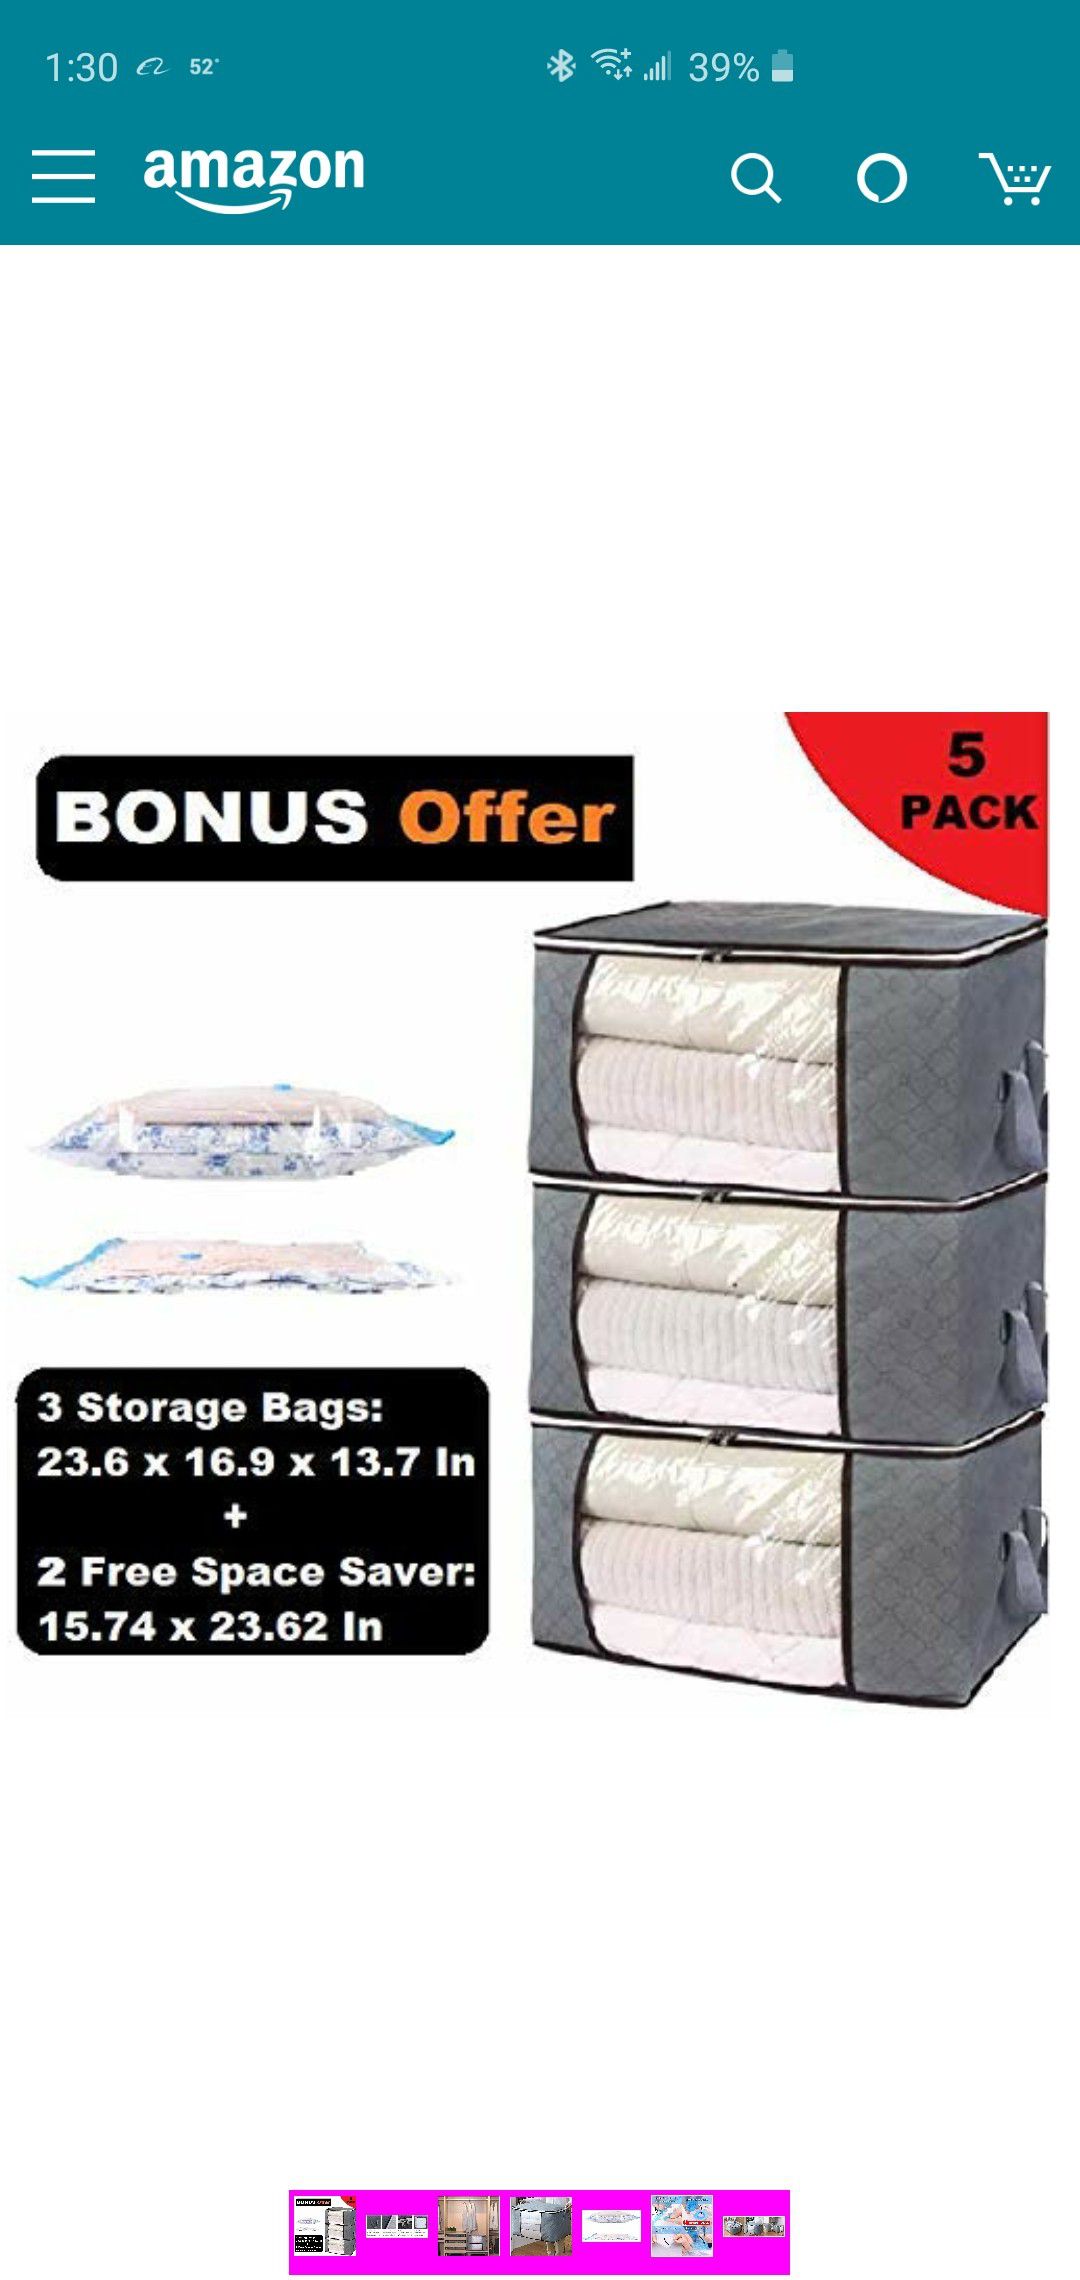 Large Storage bags available on Amazon